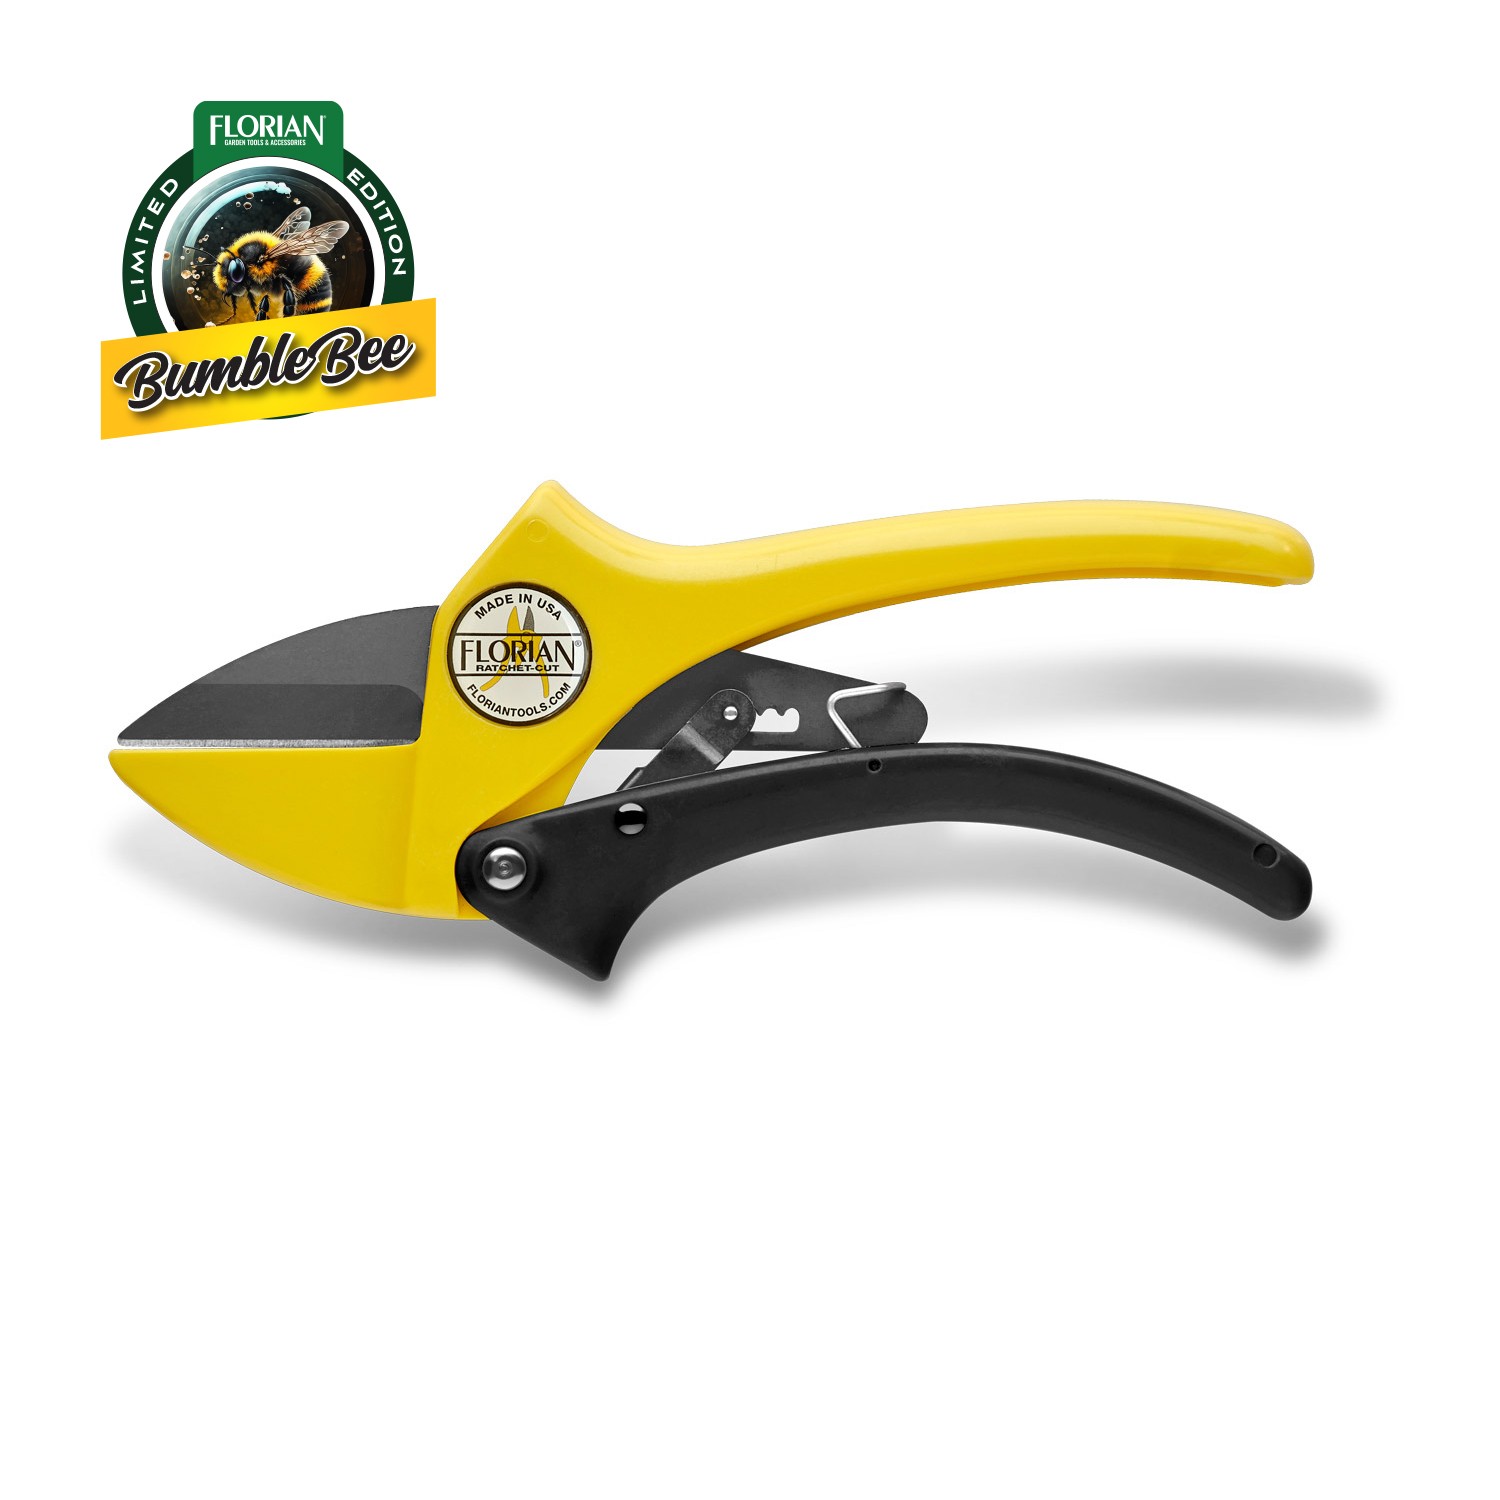 Special Edition - The Bumble Bee 701 Ratcheting Pruner